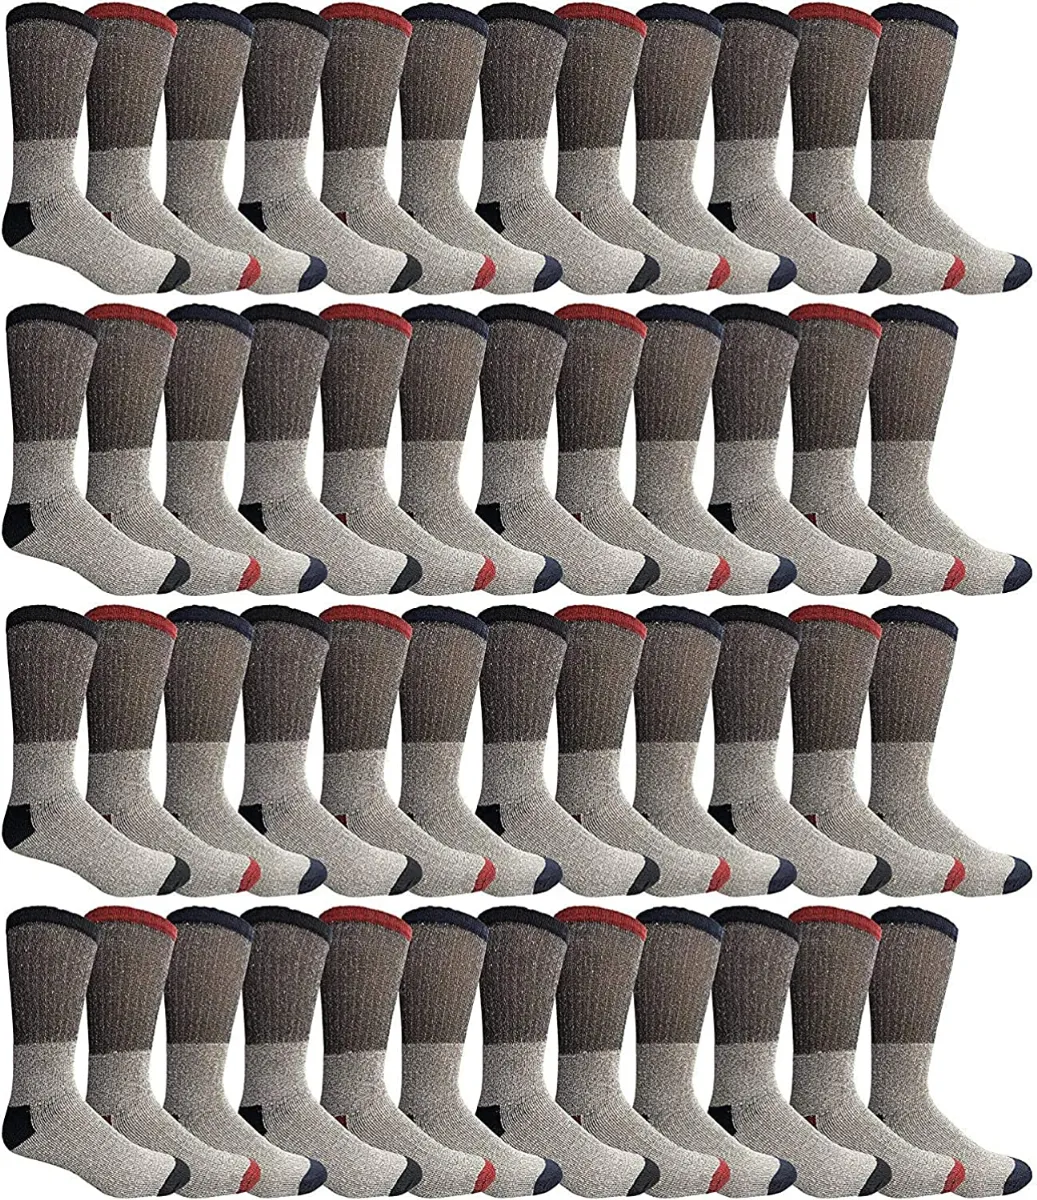 60 Pairs Kids Thermal Boot Socks, Bulk Pack Thick Warm Winter Extreme Weather Sock Size 6-8 - Boys Crew Sock